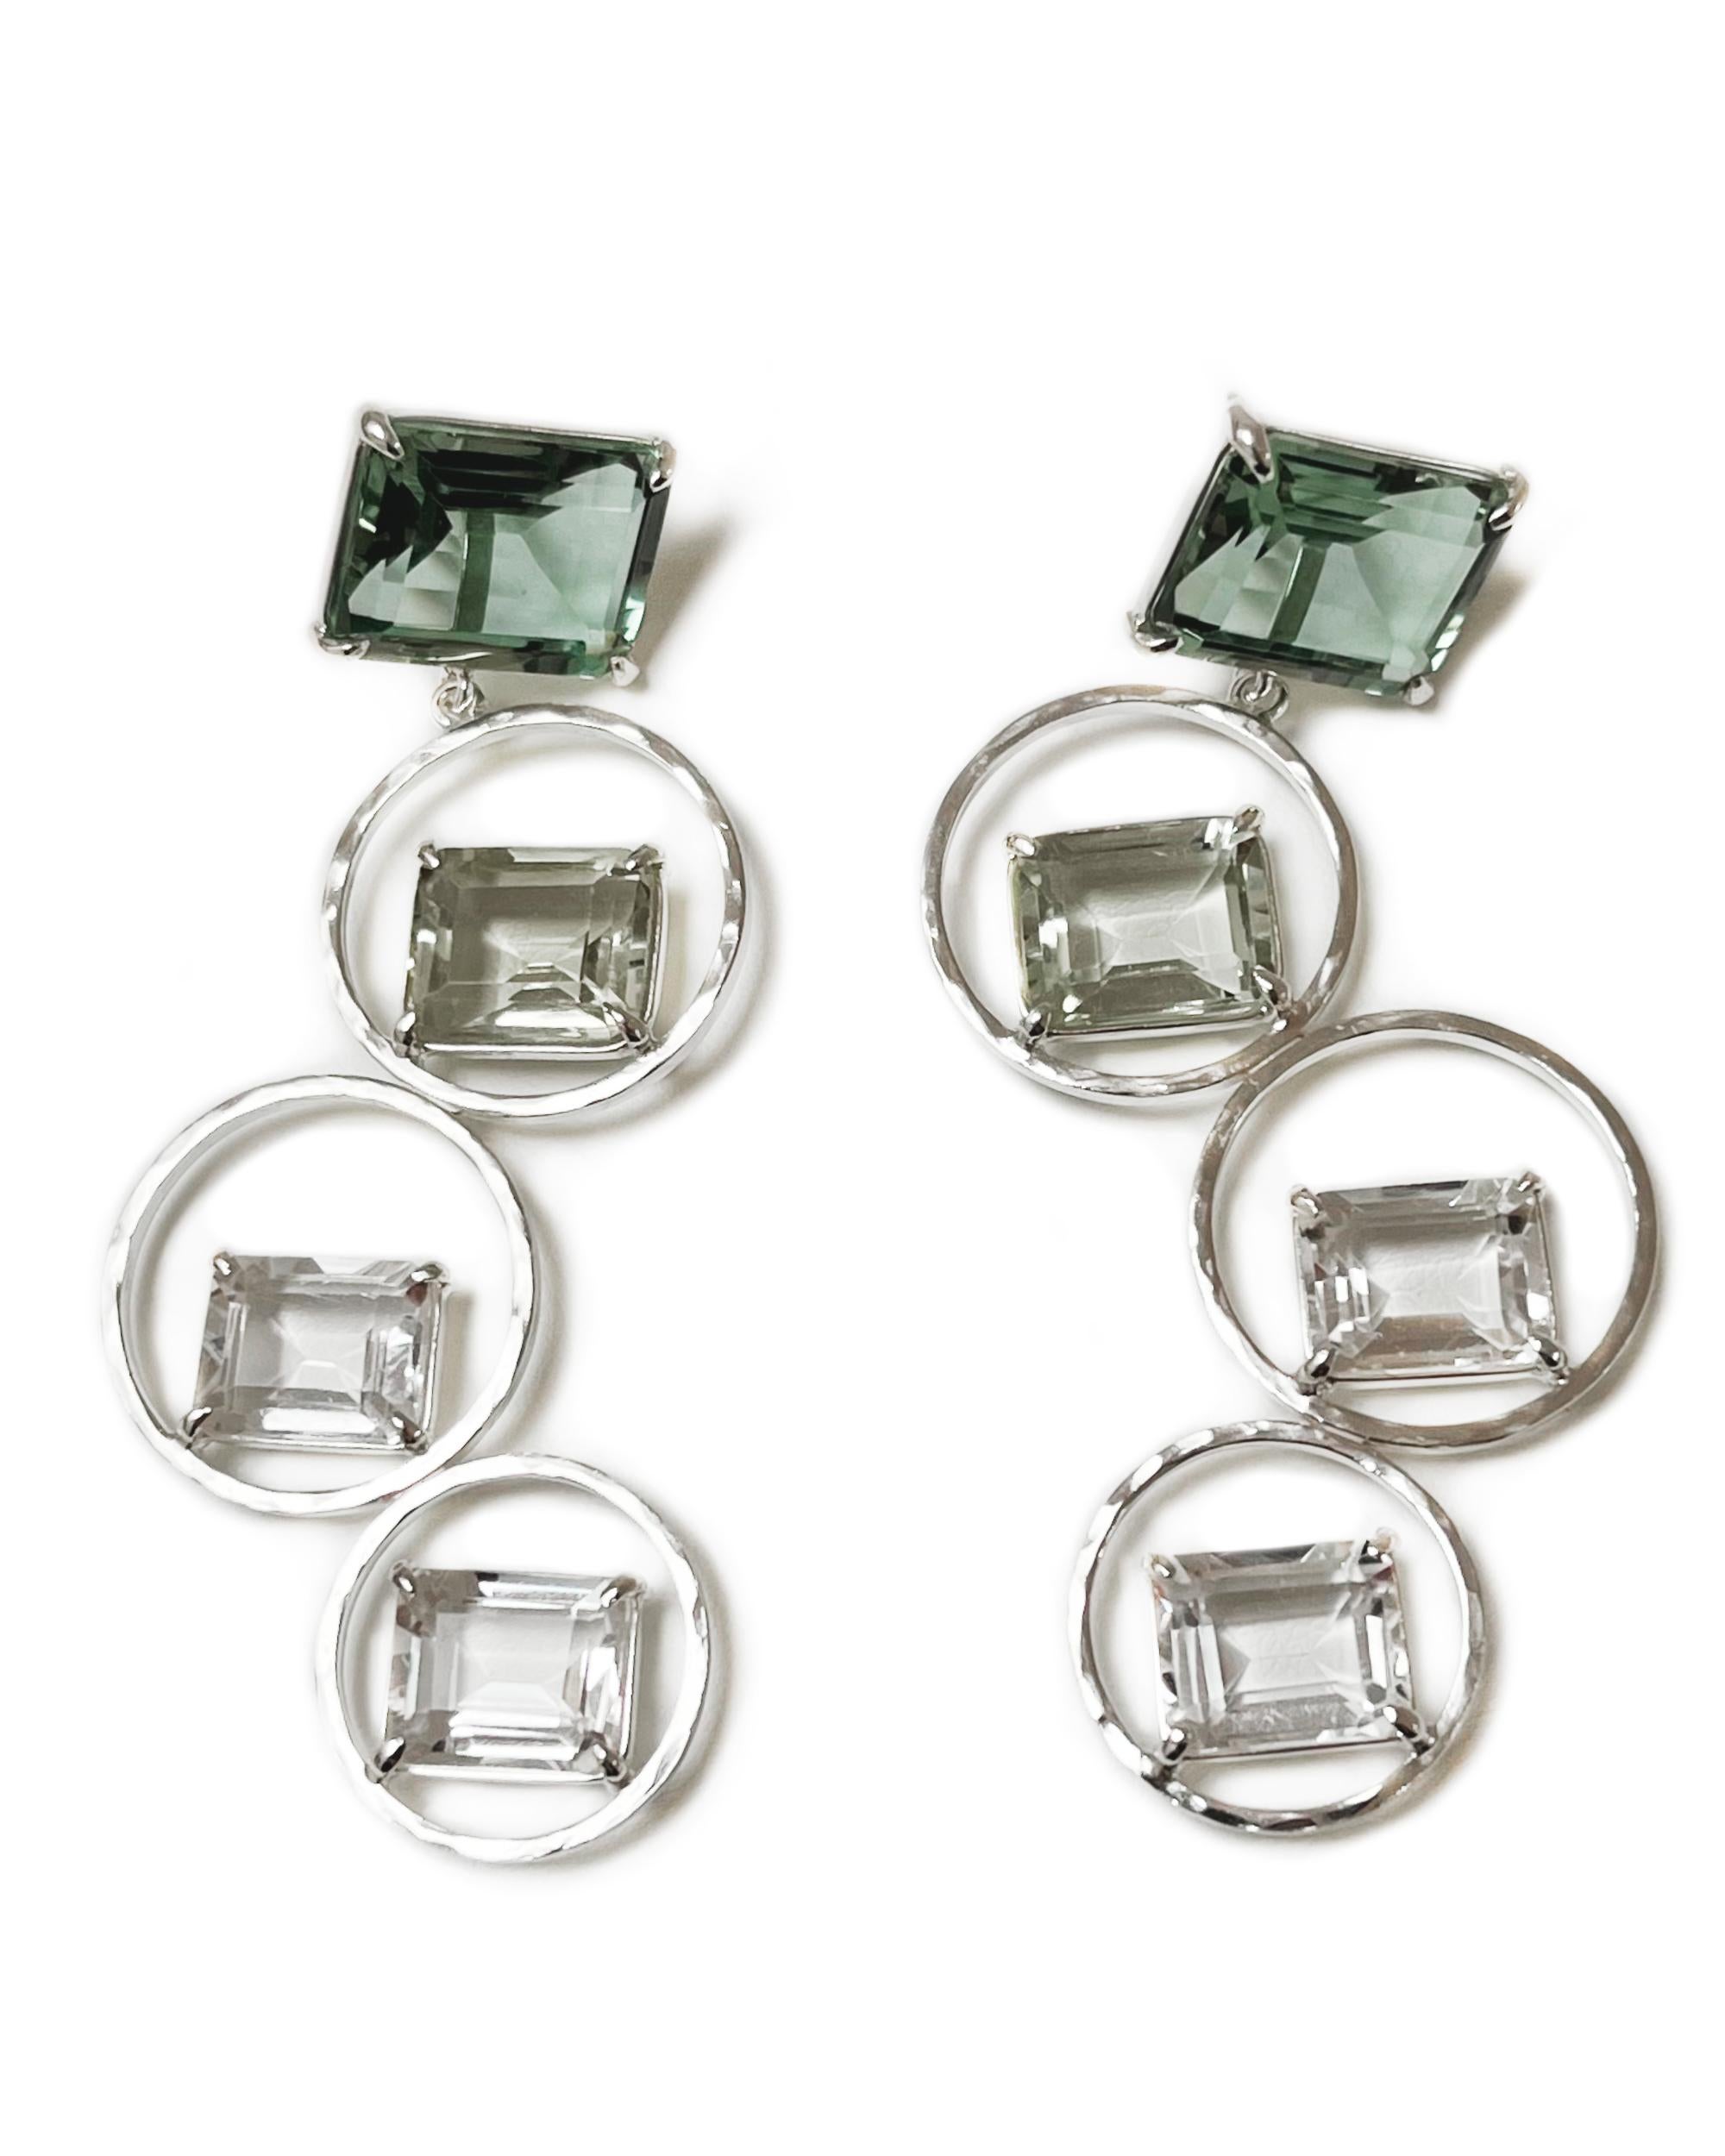 Emerald Cut Sarah Earrings in Green Quartz, Prasiolite, White Topaz and Sterling Silver For Sale